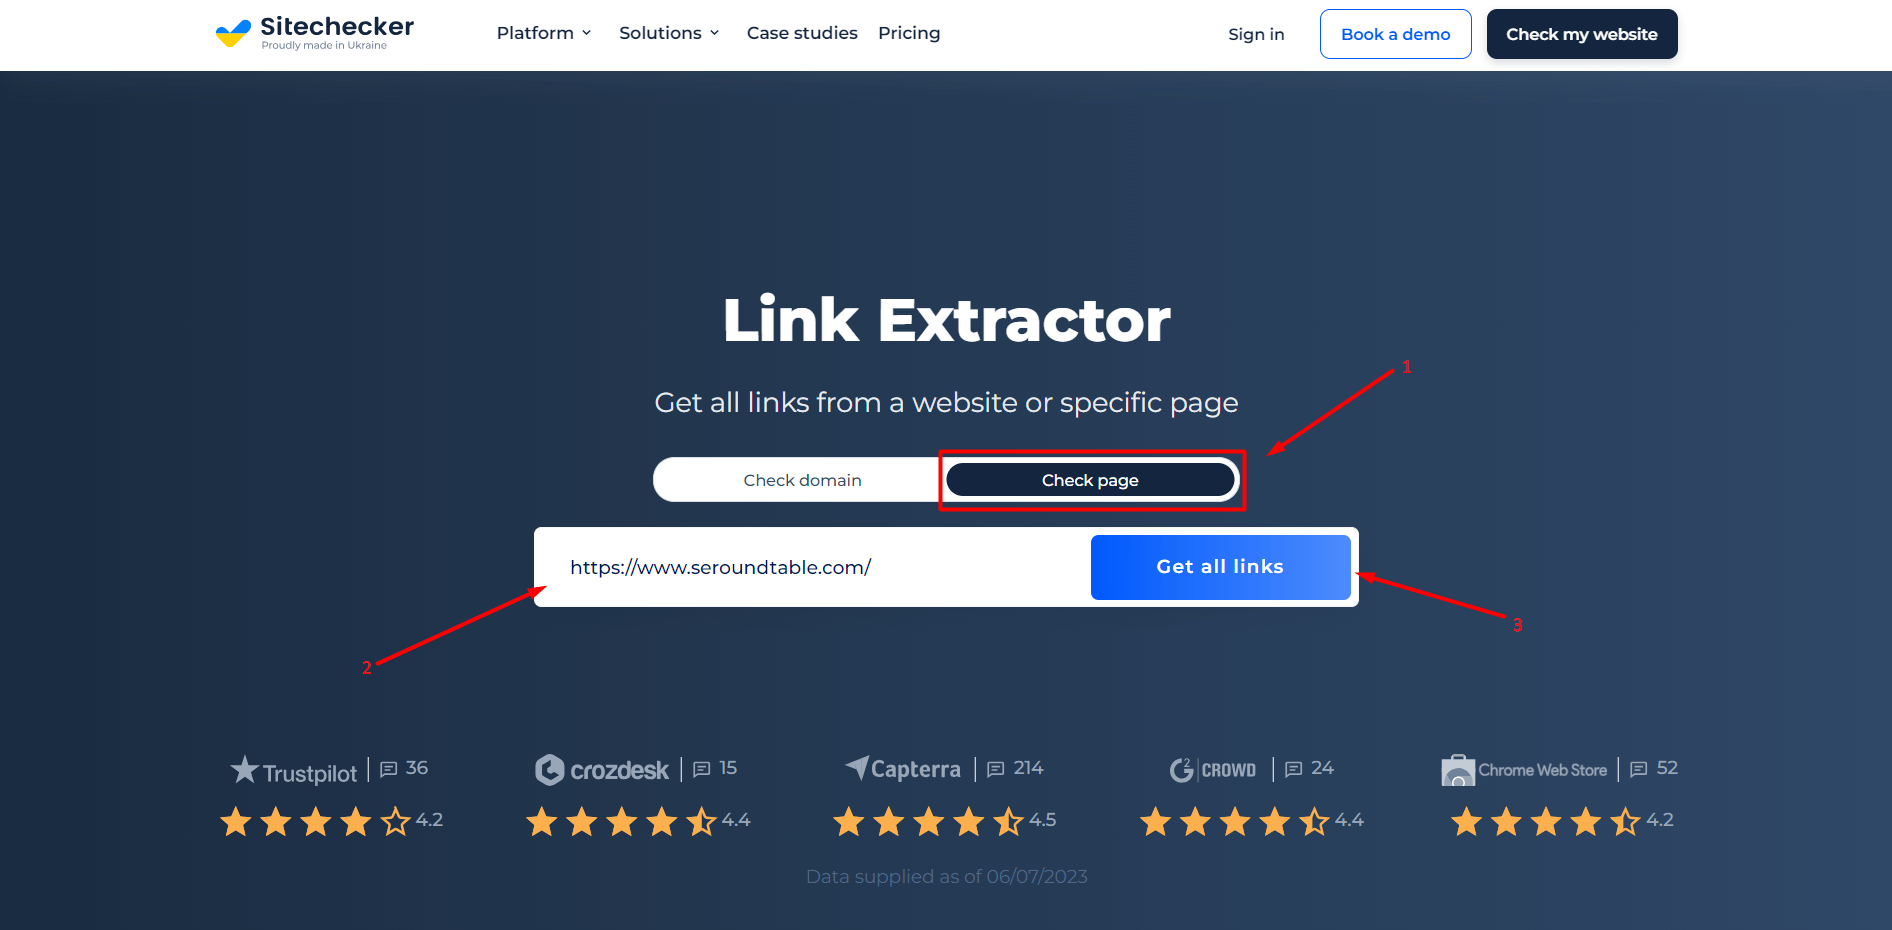 Link Extractor Page Check